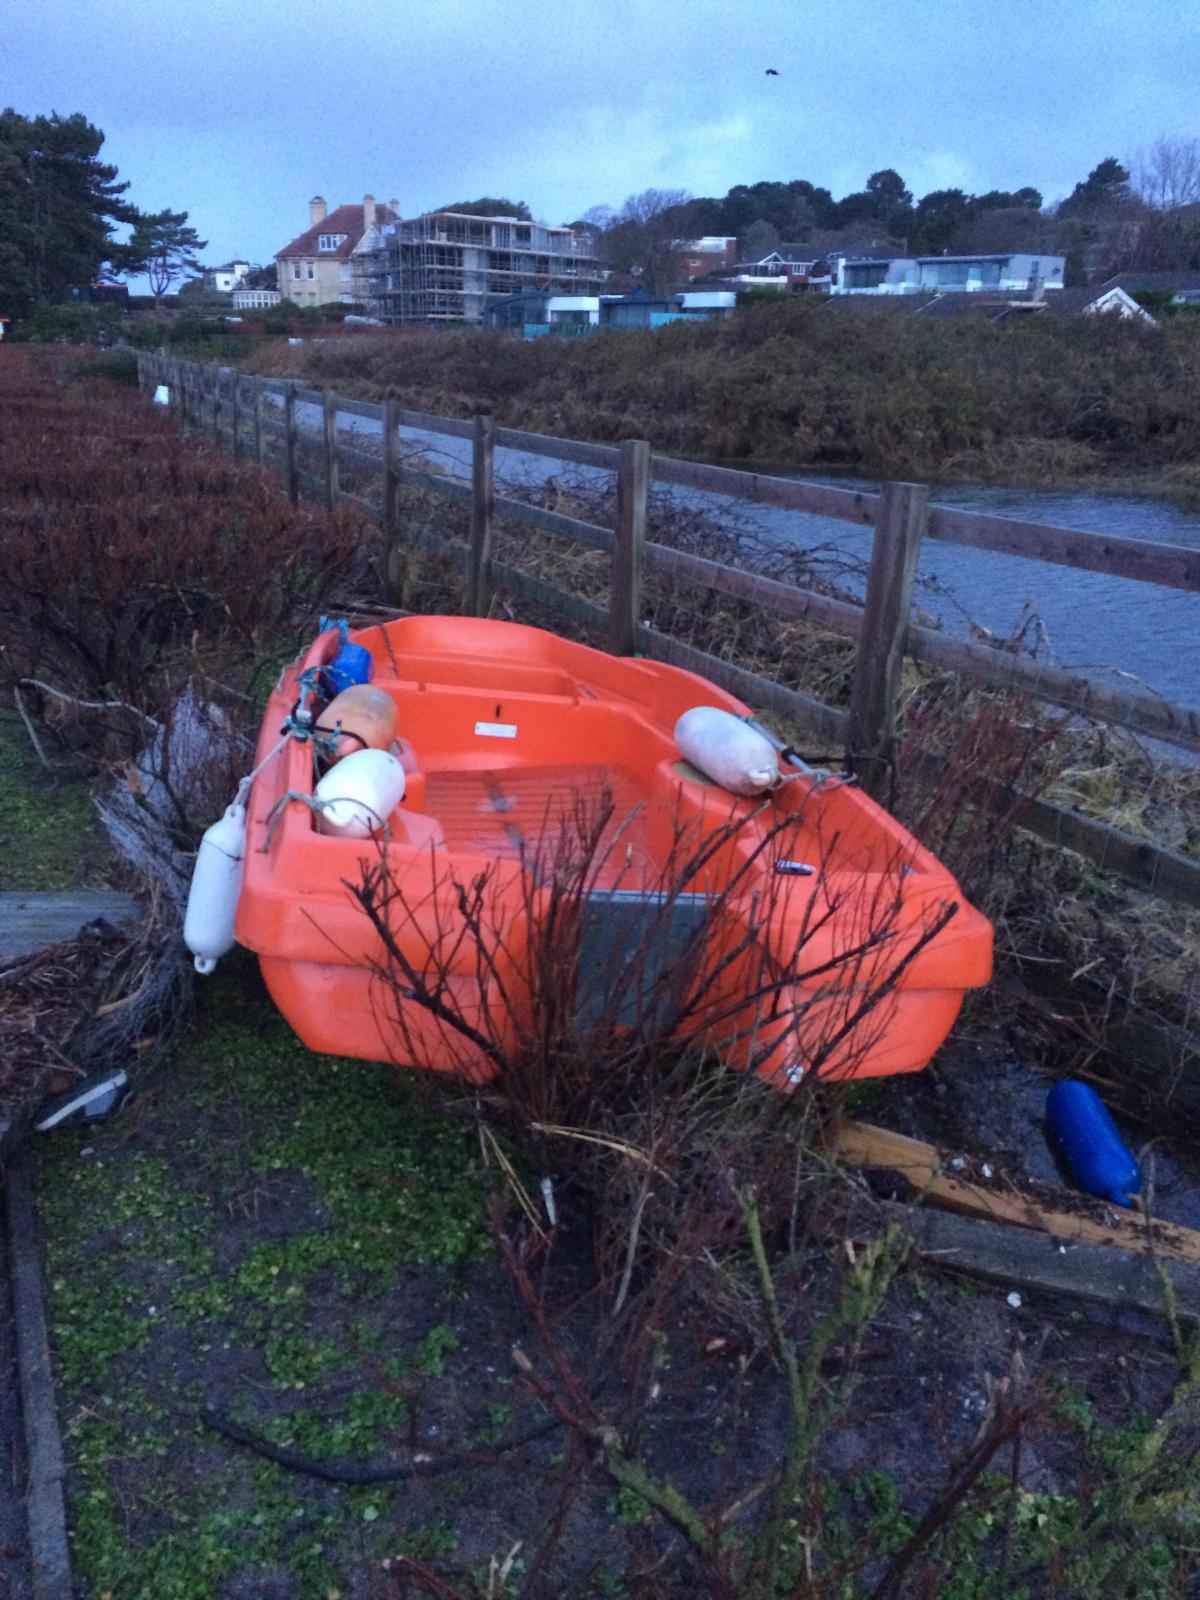 Daily Echo reader photos of the storm and damage left behind after severe weather swept through Dorset on February 14 and February 15. Picture sent by Ben Schofield of Sandbanks